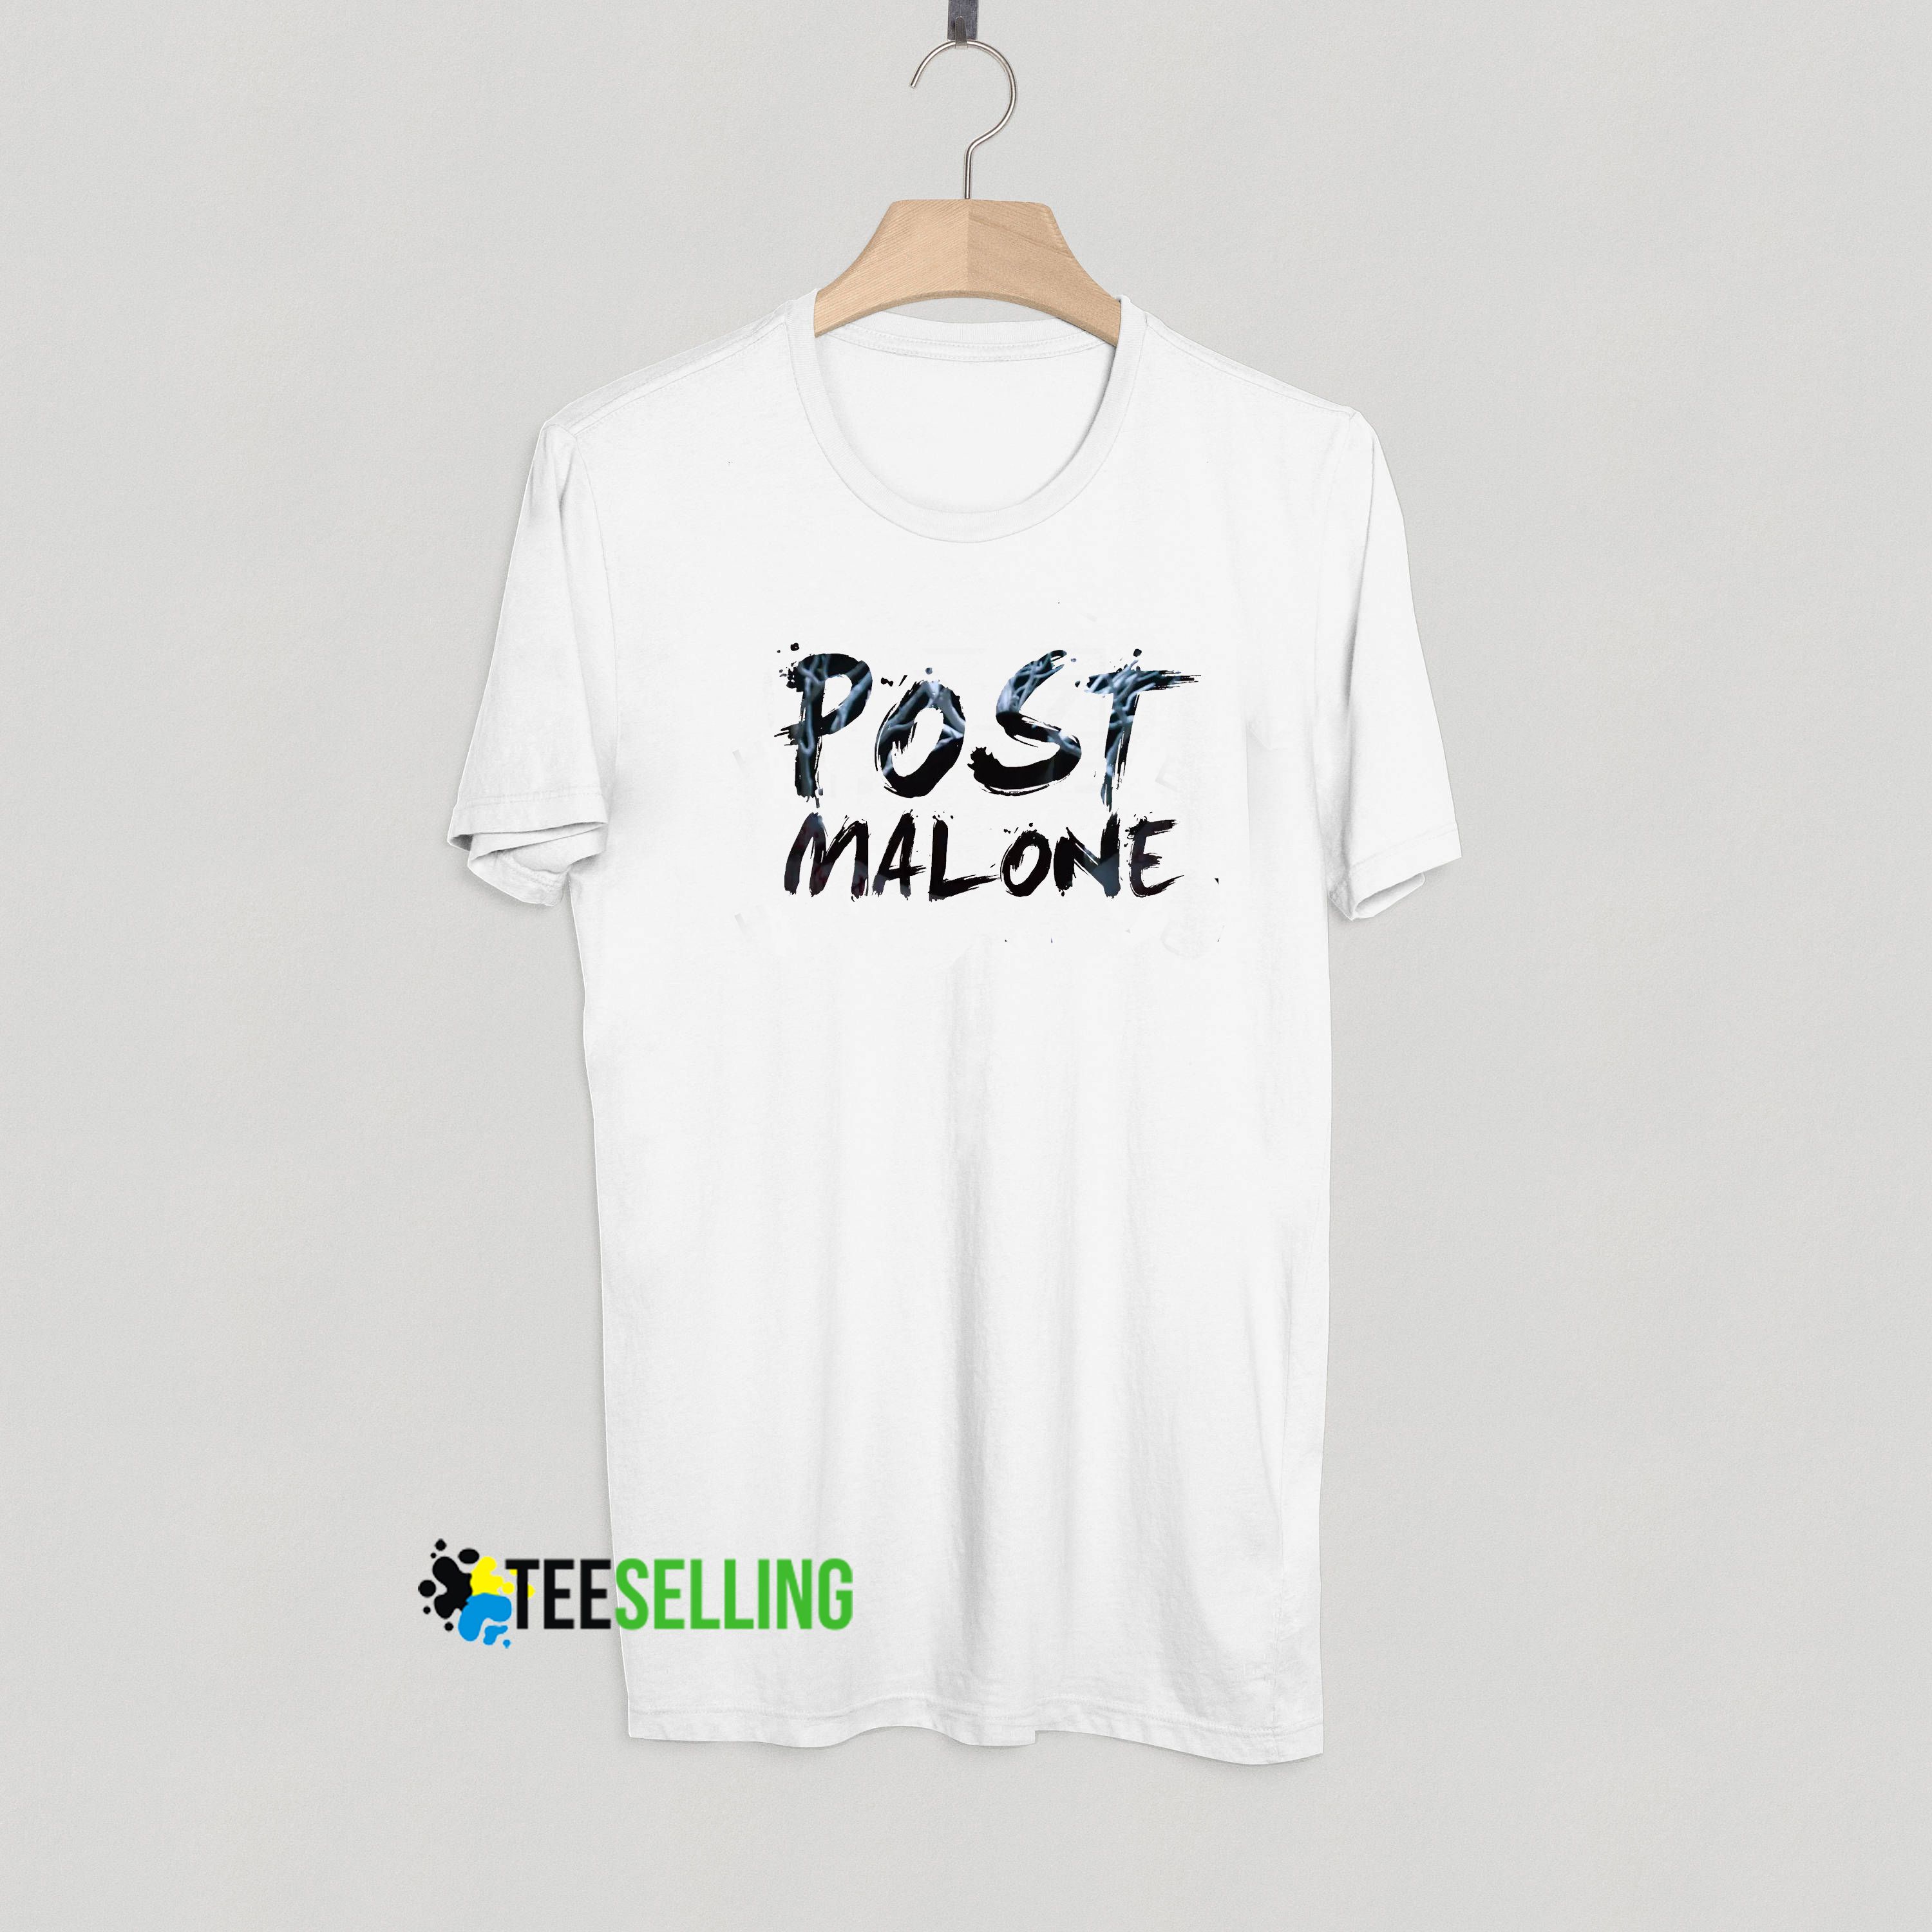 Buy > t shirt post malone > in stock